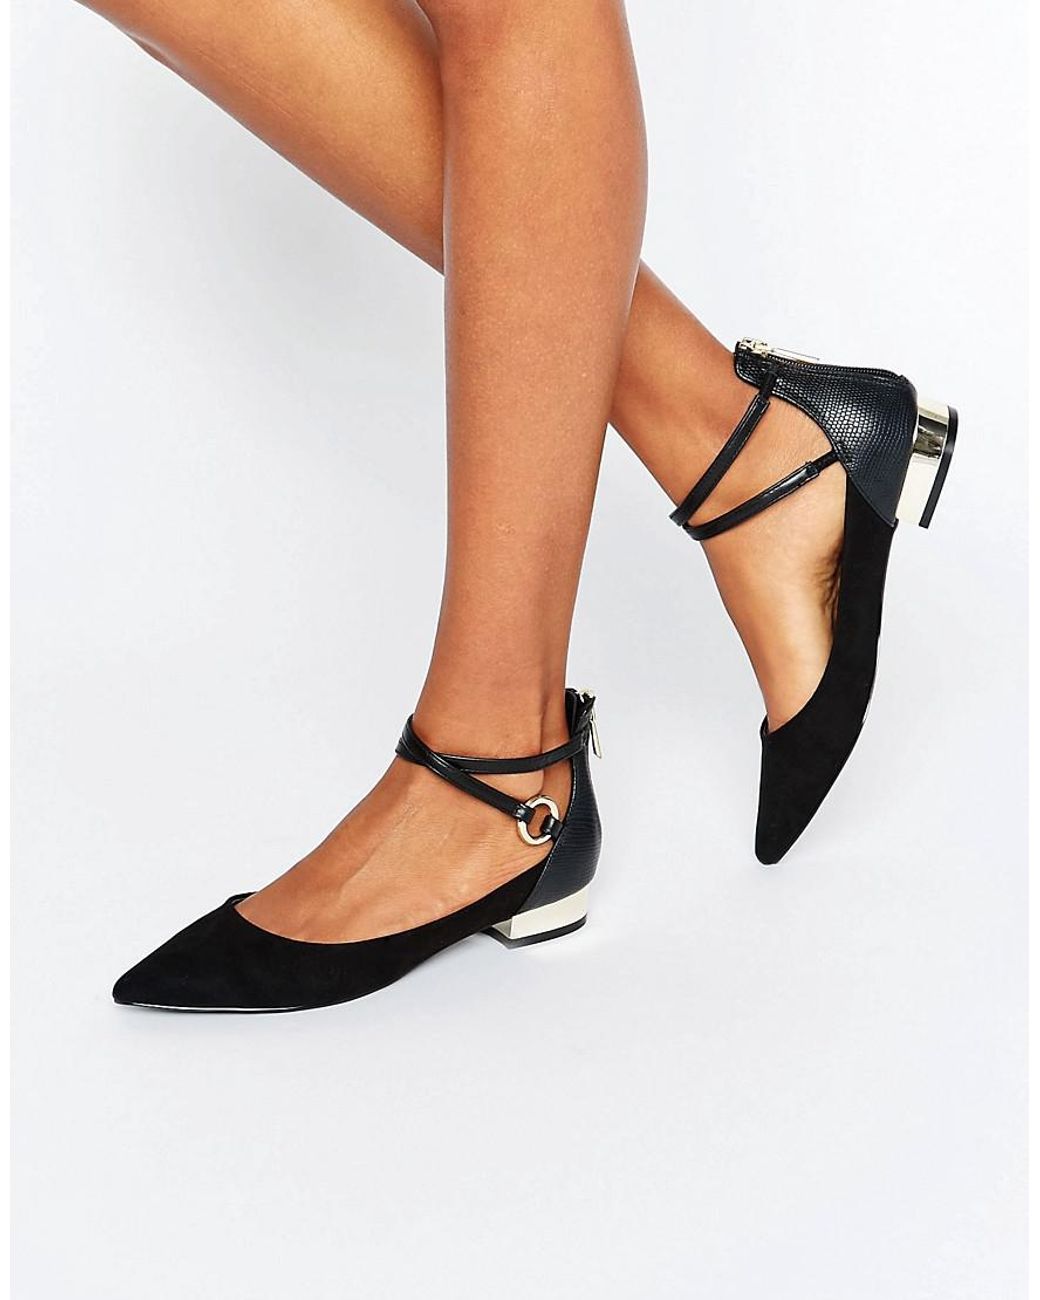 ALDO Biacci Strap Plated Heel Shoes in Black Lyst